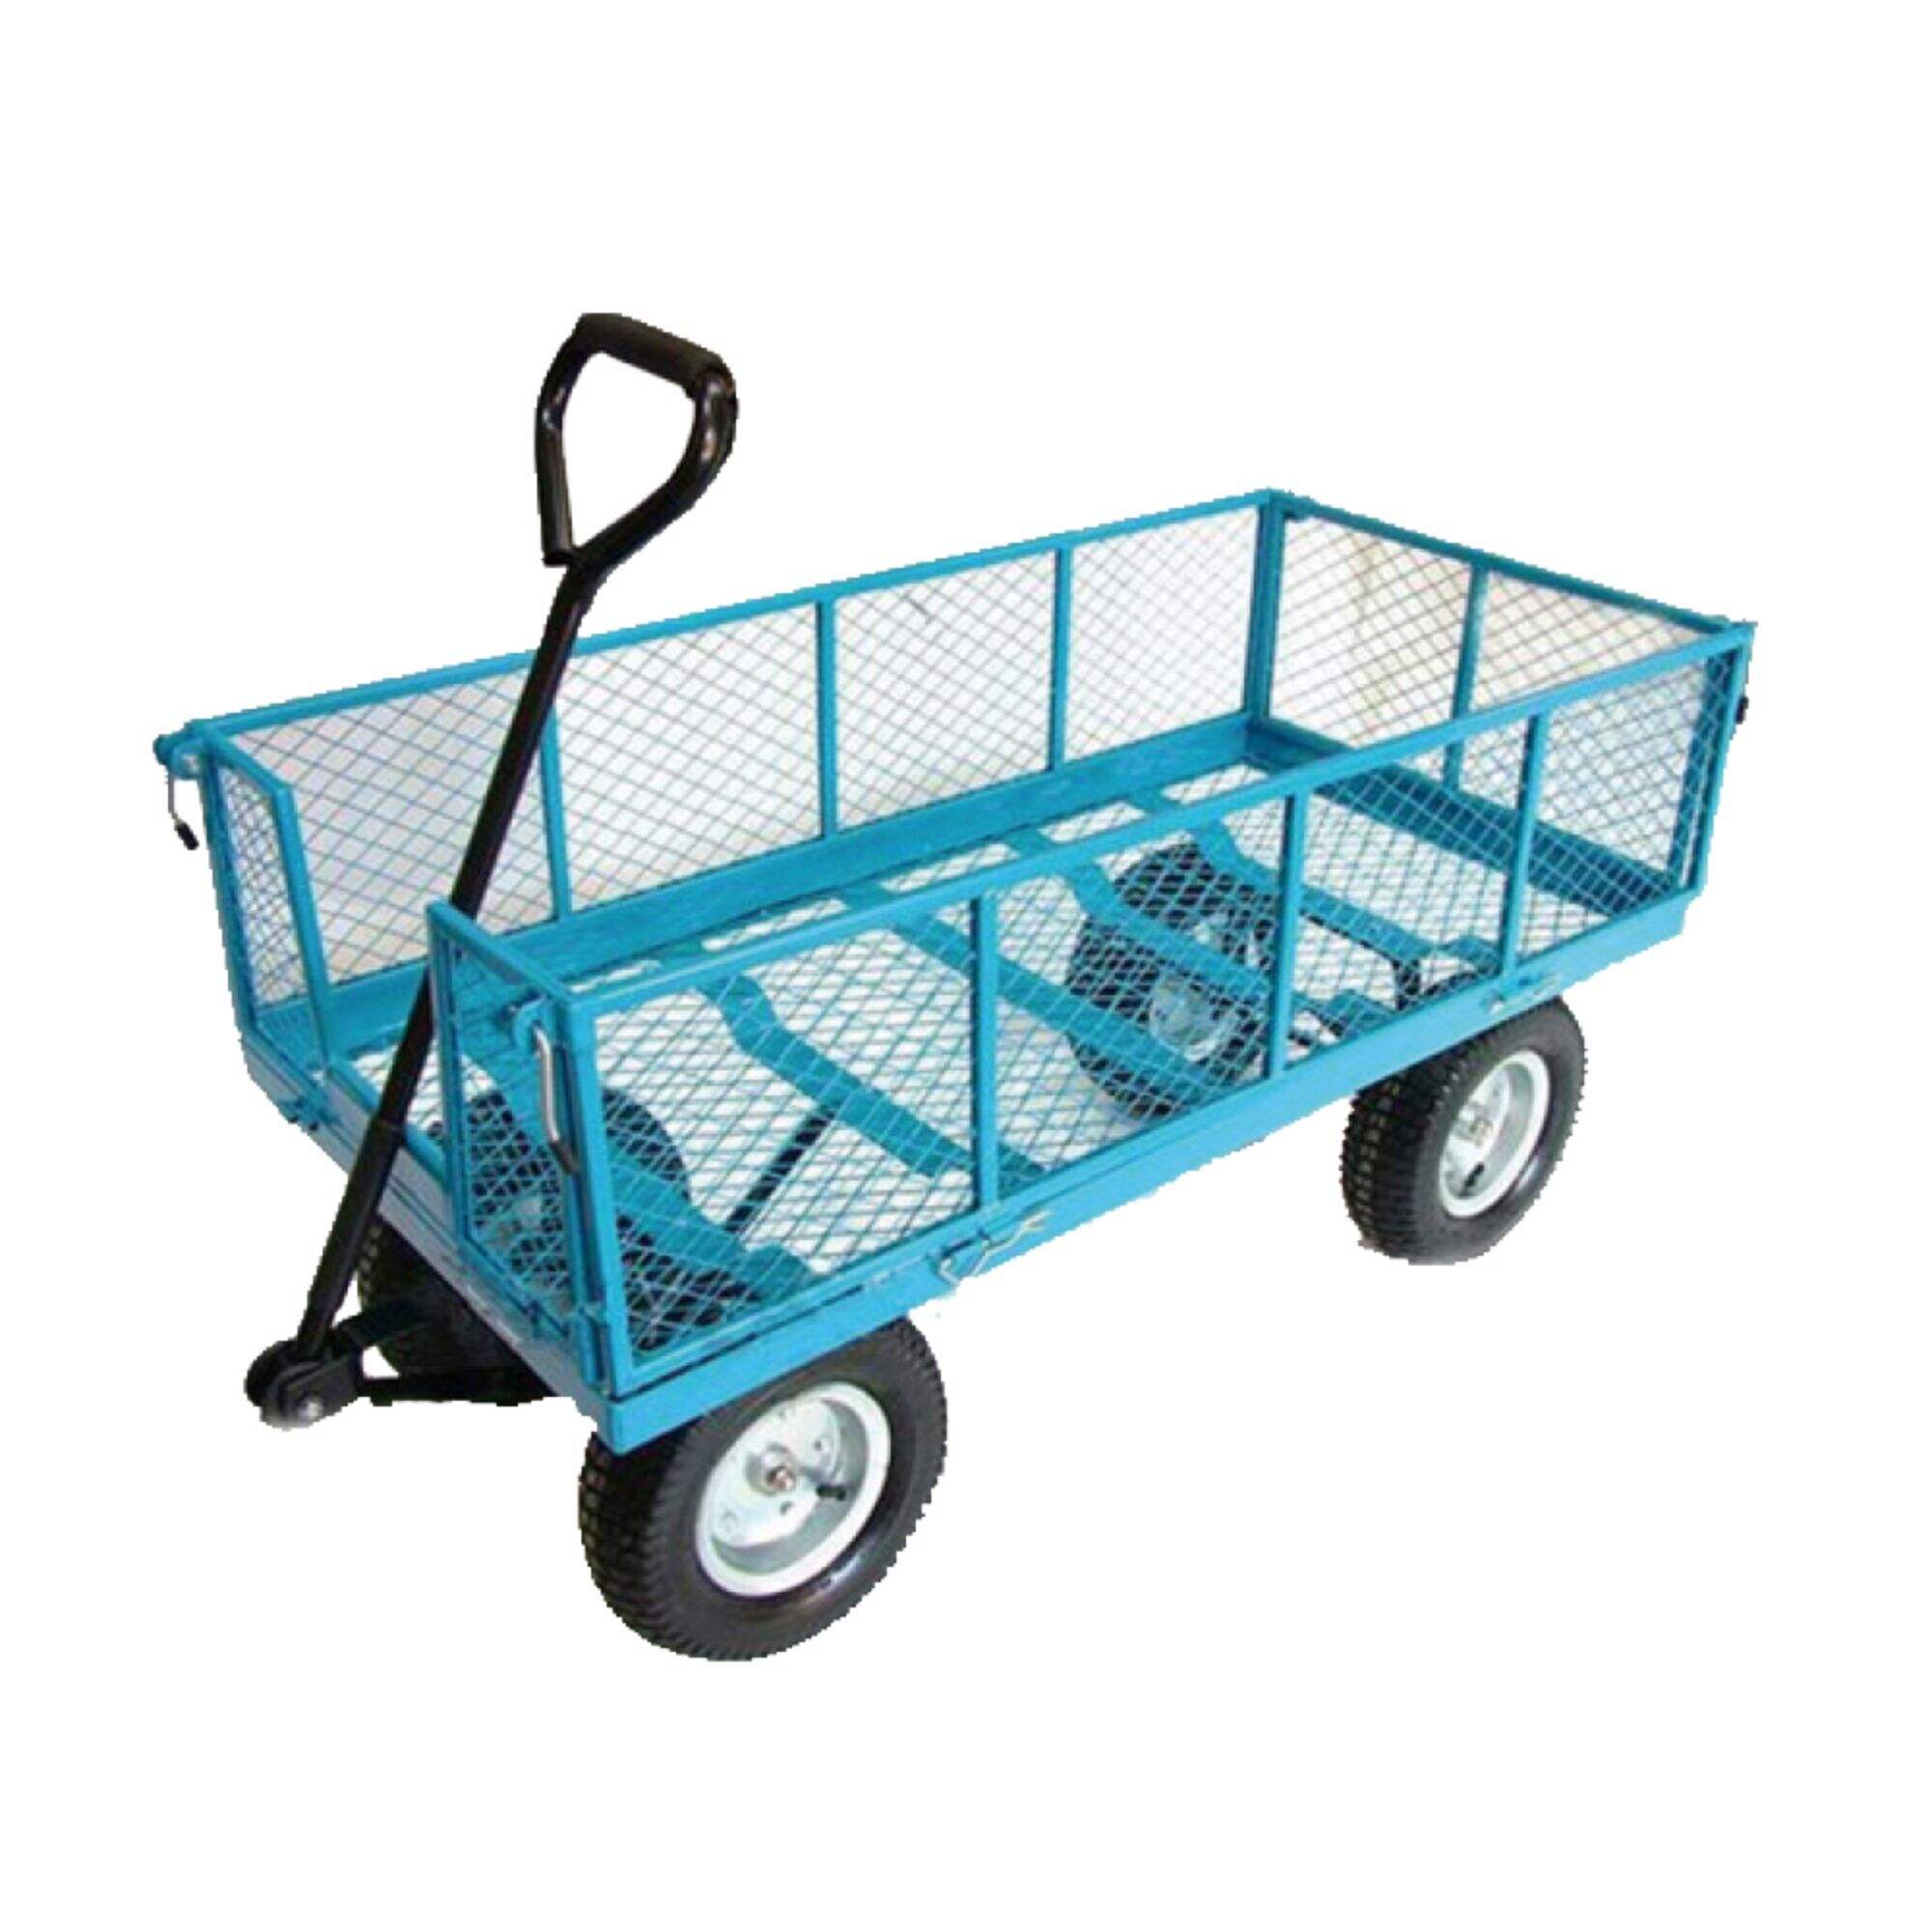 TC4205 Mesh Steel Garden Trolley Cart, Folding Utility Wagon, with Removable Sides, 13 x 5.00-6 Inch Pneumatic Wheel, 500KG Capacity